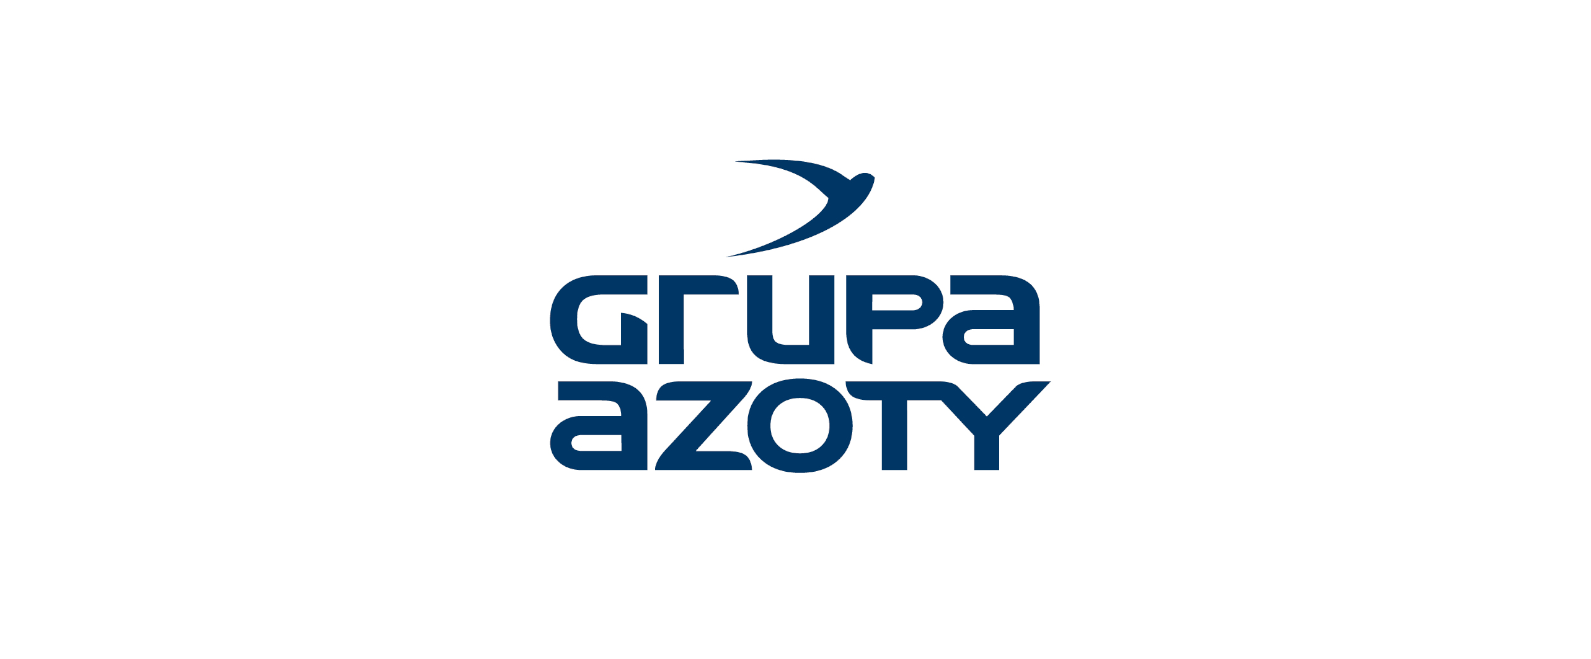 In view of stabilising gas prices on European market in January, Grupa Azoty updates its price lists for fertilizer products